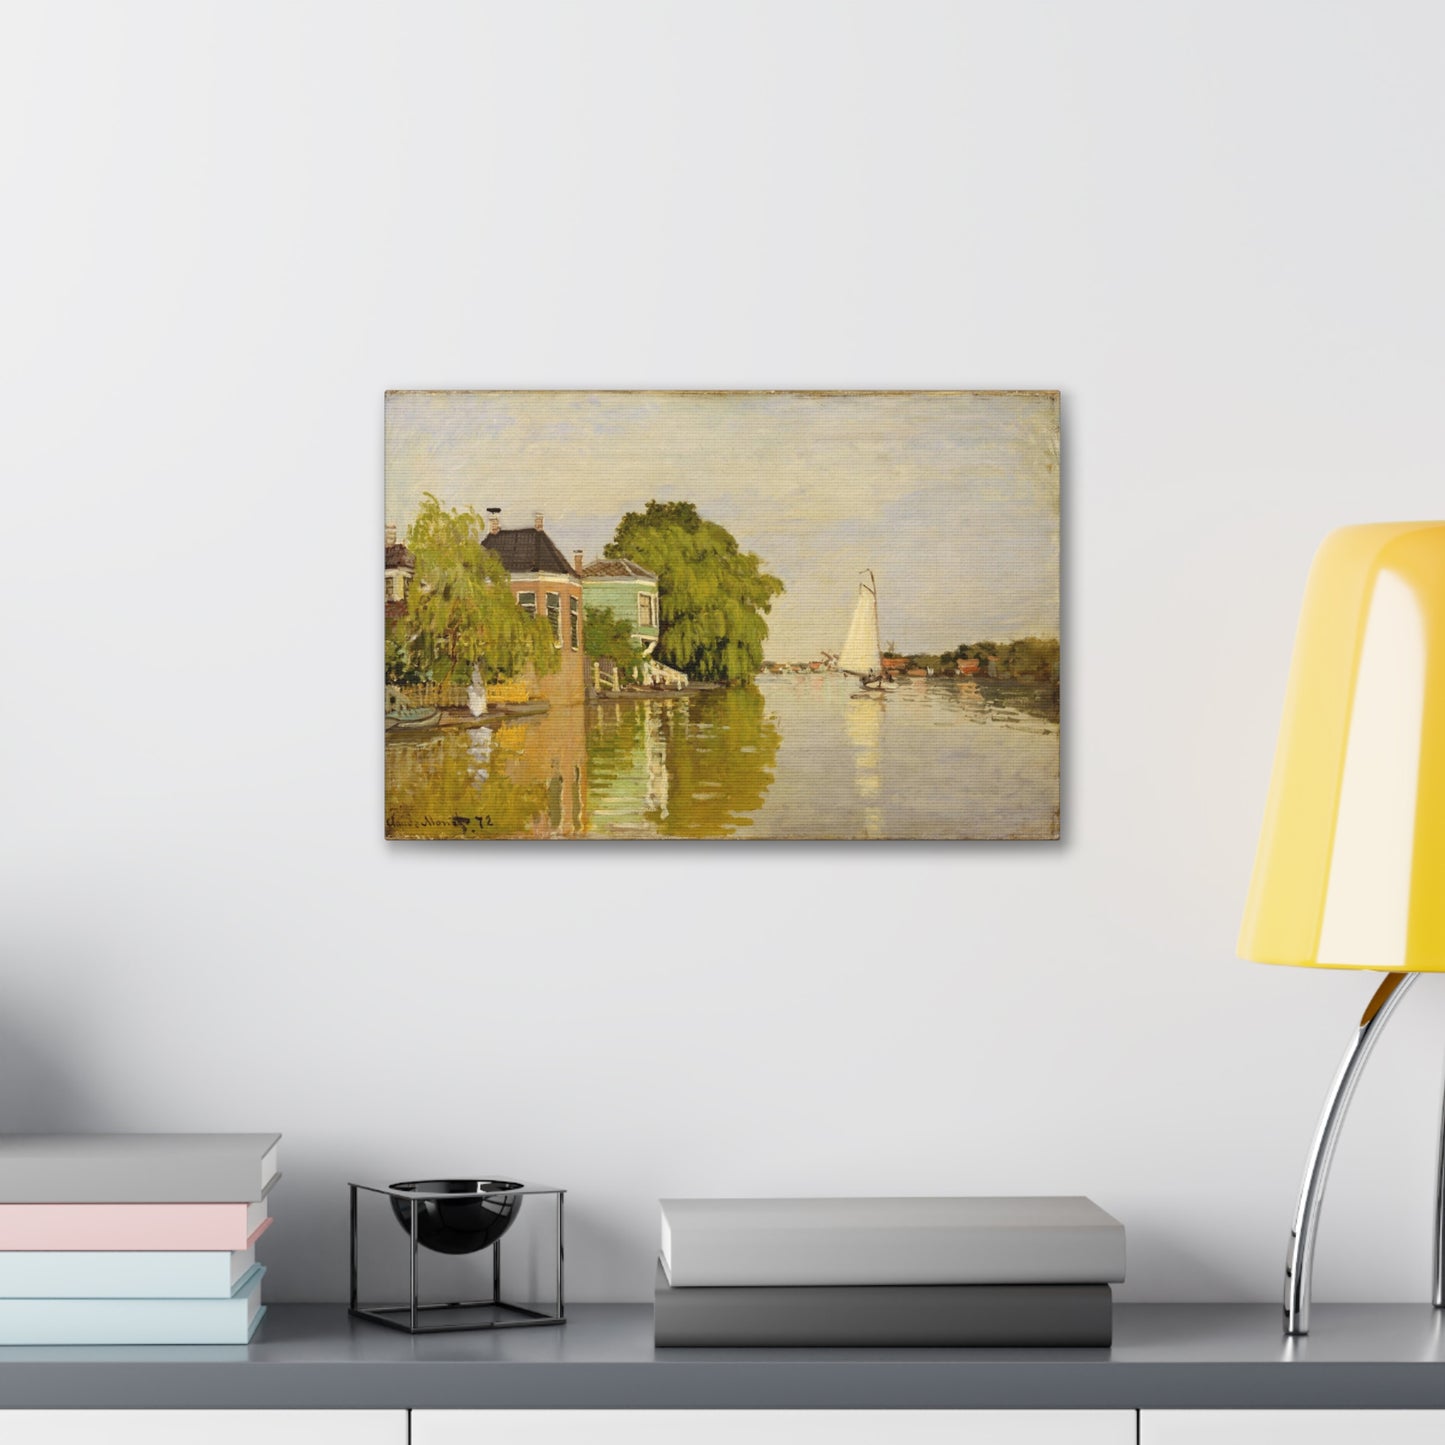 Houses on the Achterzaan by Claude Monet - Canvas Print